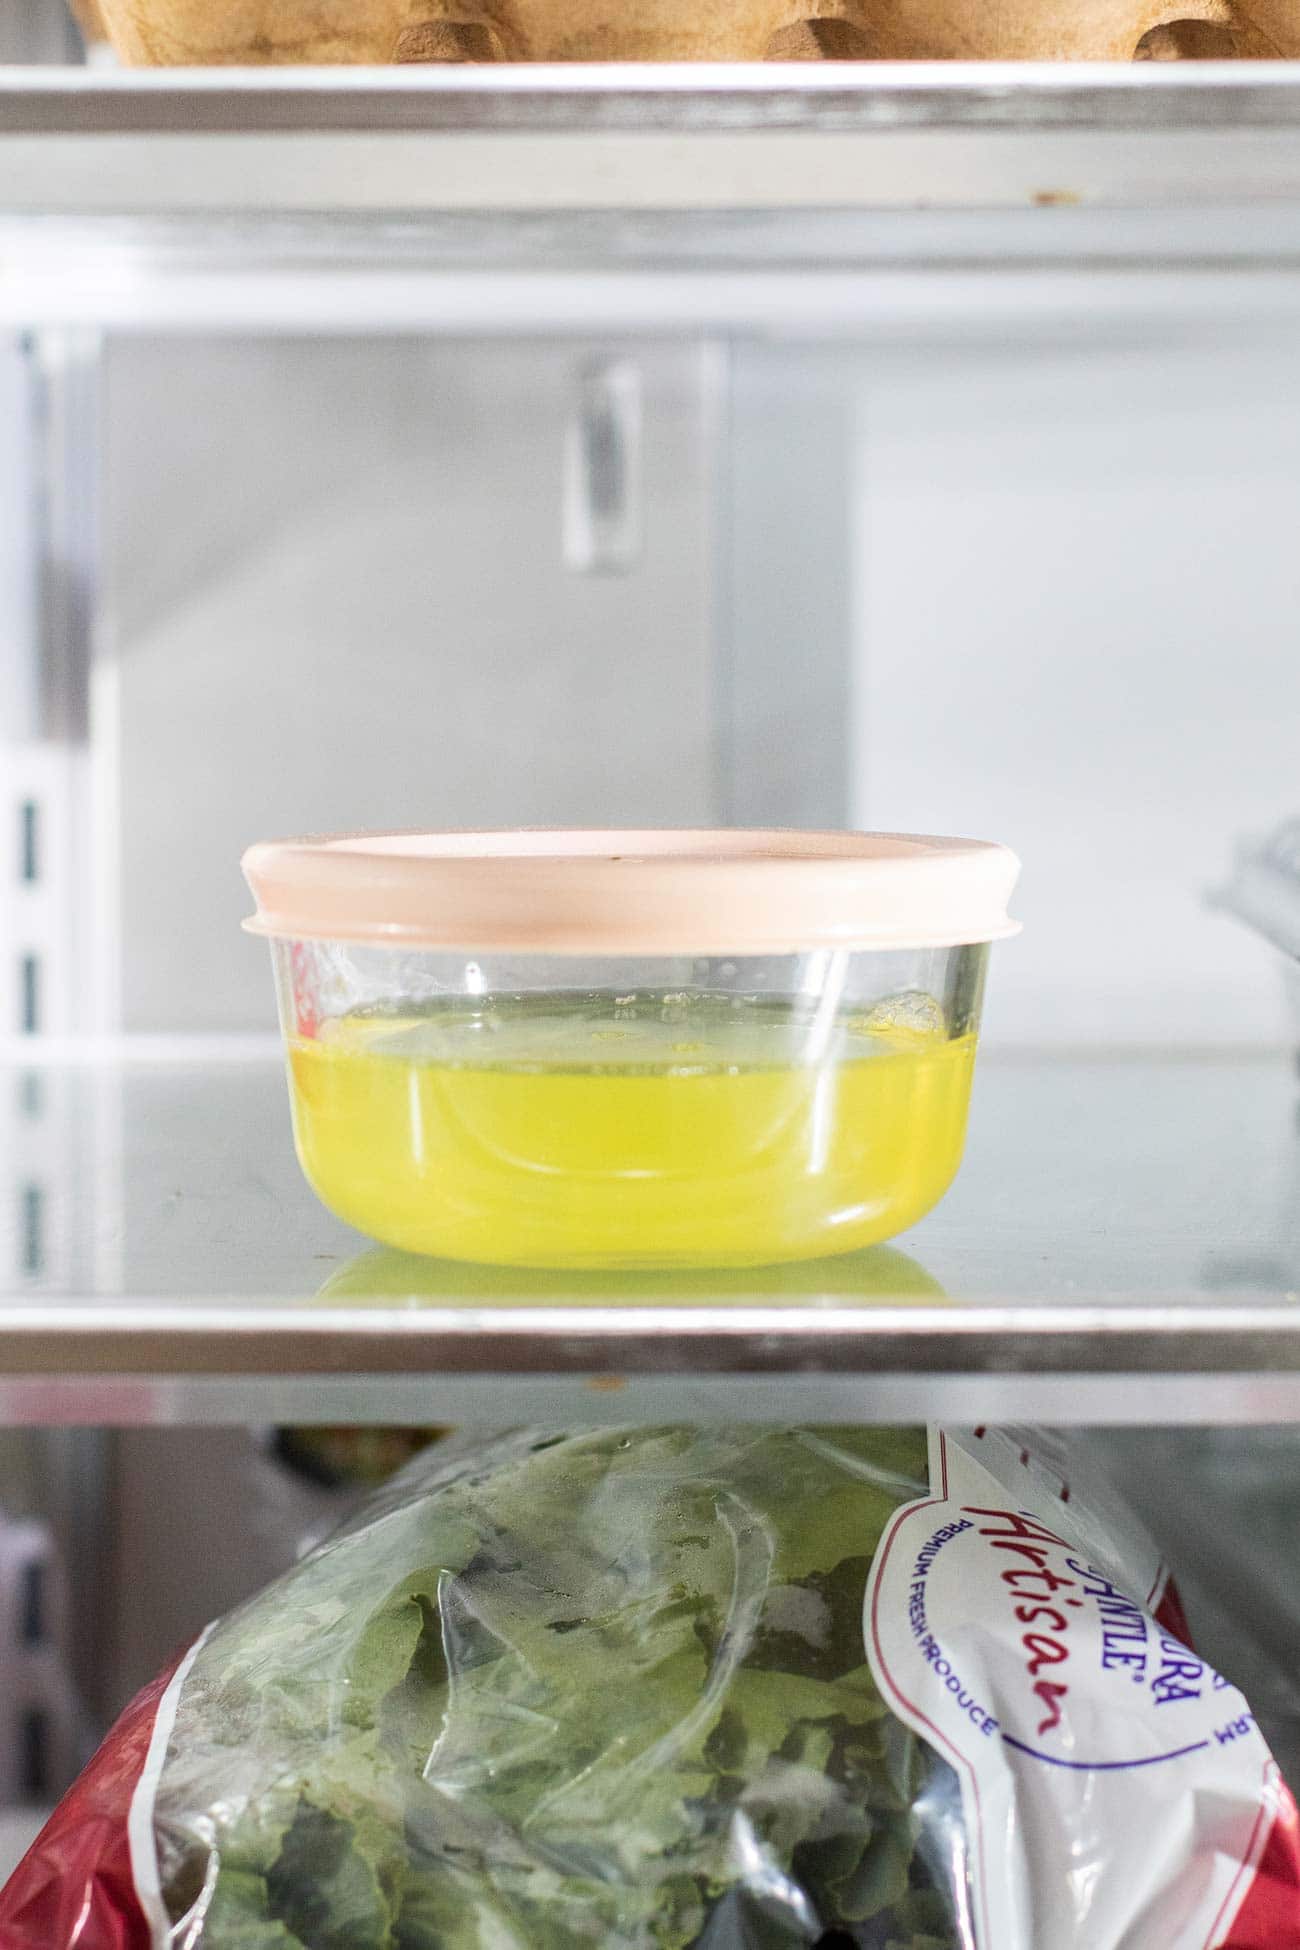 Egg whites in a glass container in the refrigerator.